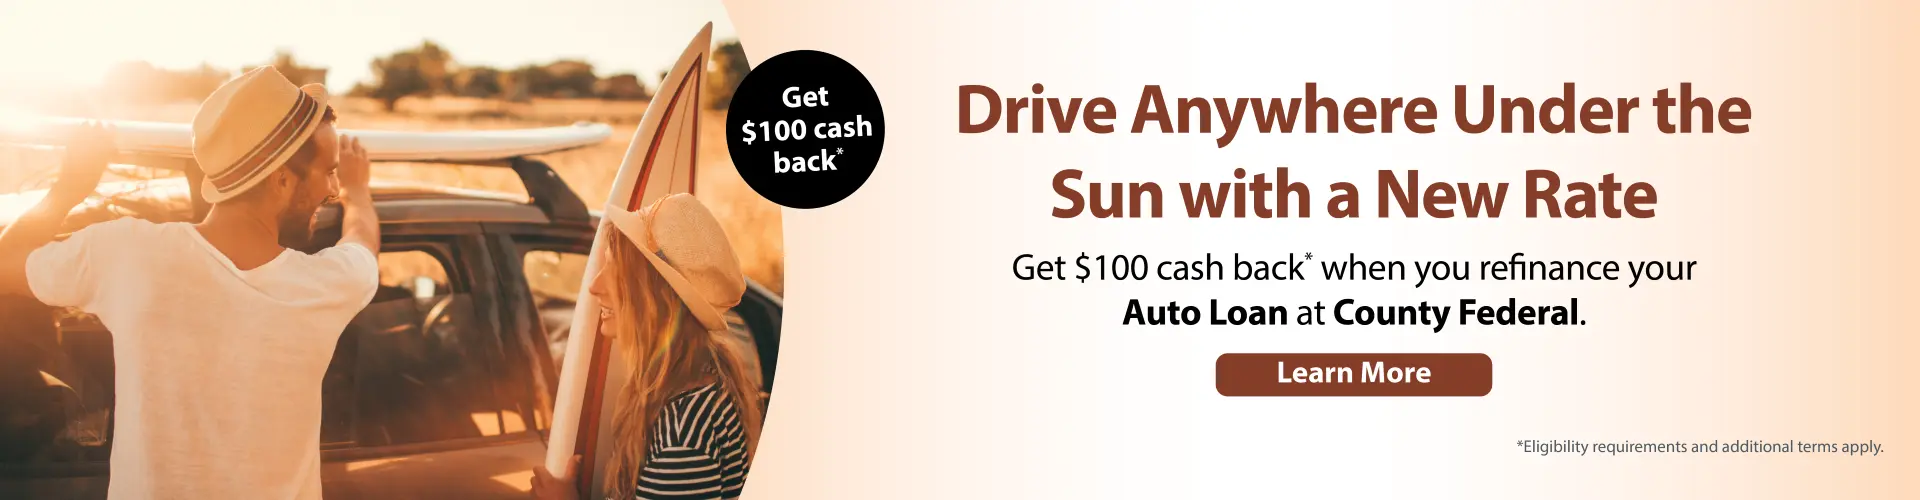 Drive Anywhere Under the Sun with a New Rate